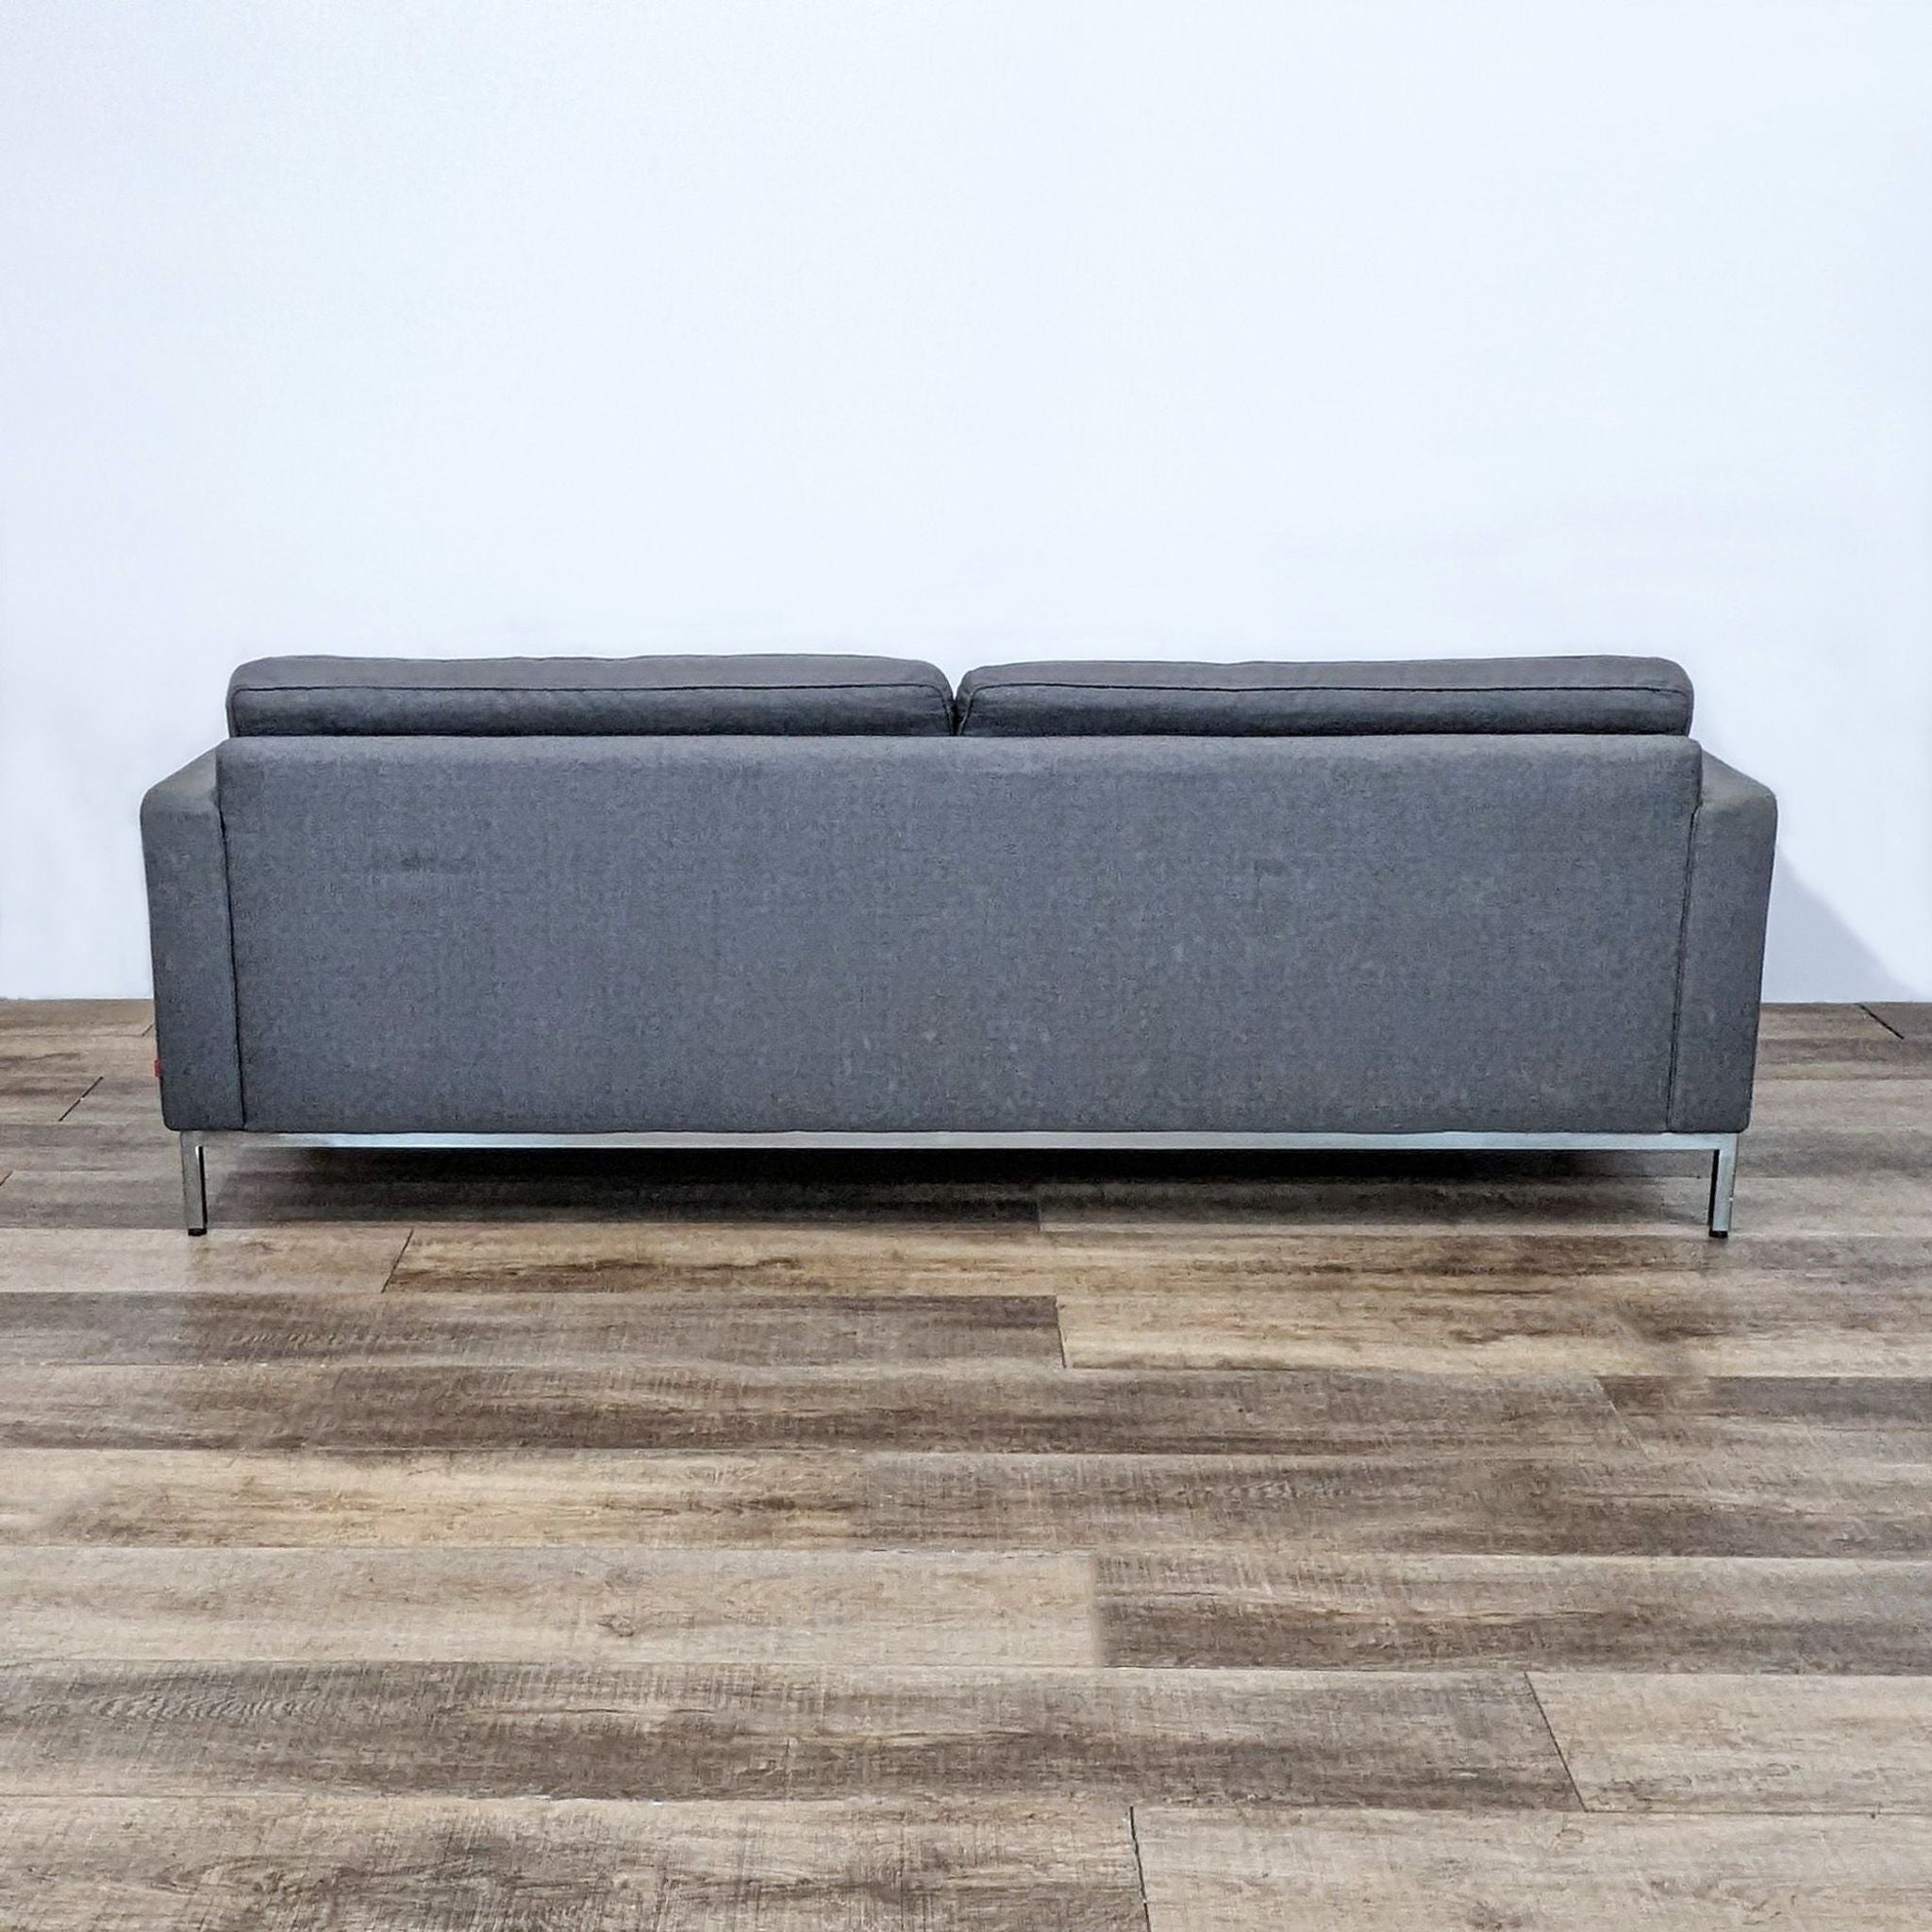 EQ3 charcoal 3-seat sofa showcasing tufted upholstery, slim arms, and chrome legs, viewed from various angles.